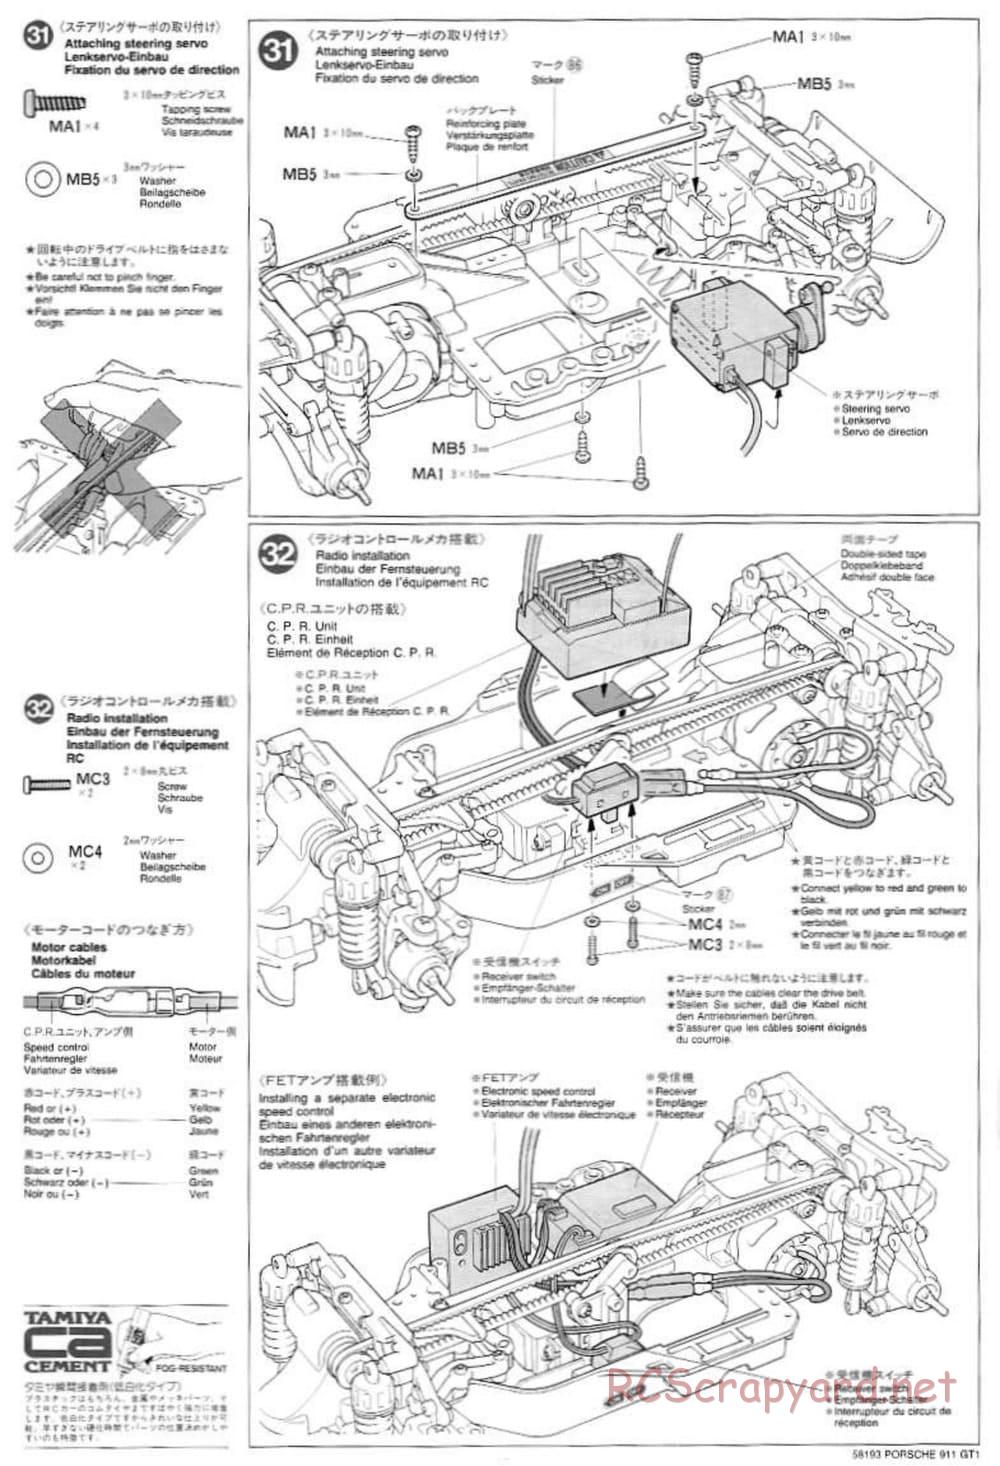 Tamiya - Porsche 911 GT1 - TA-03RS Chassis - Manual - Page 16